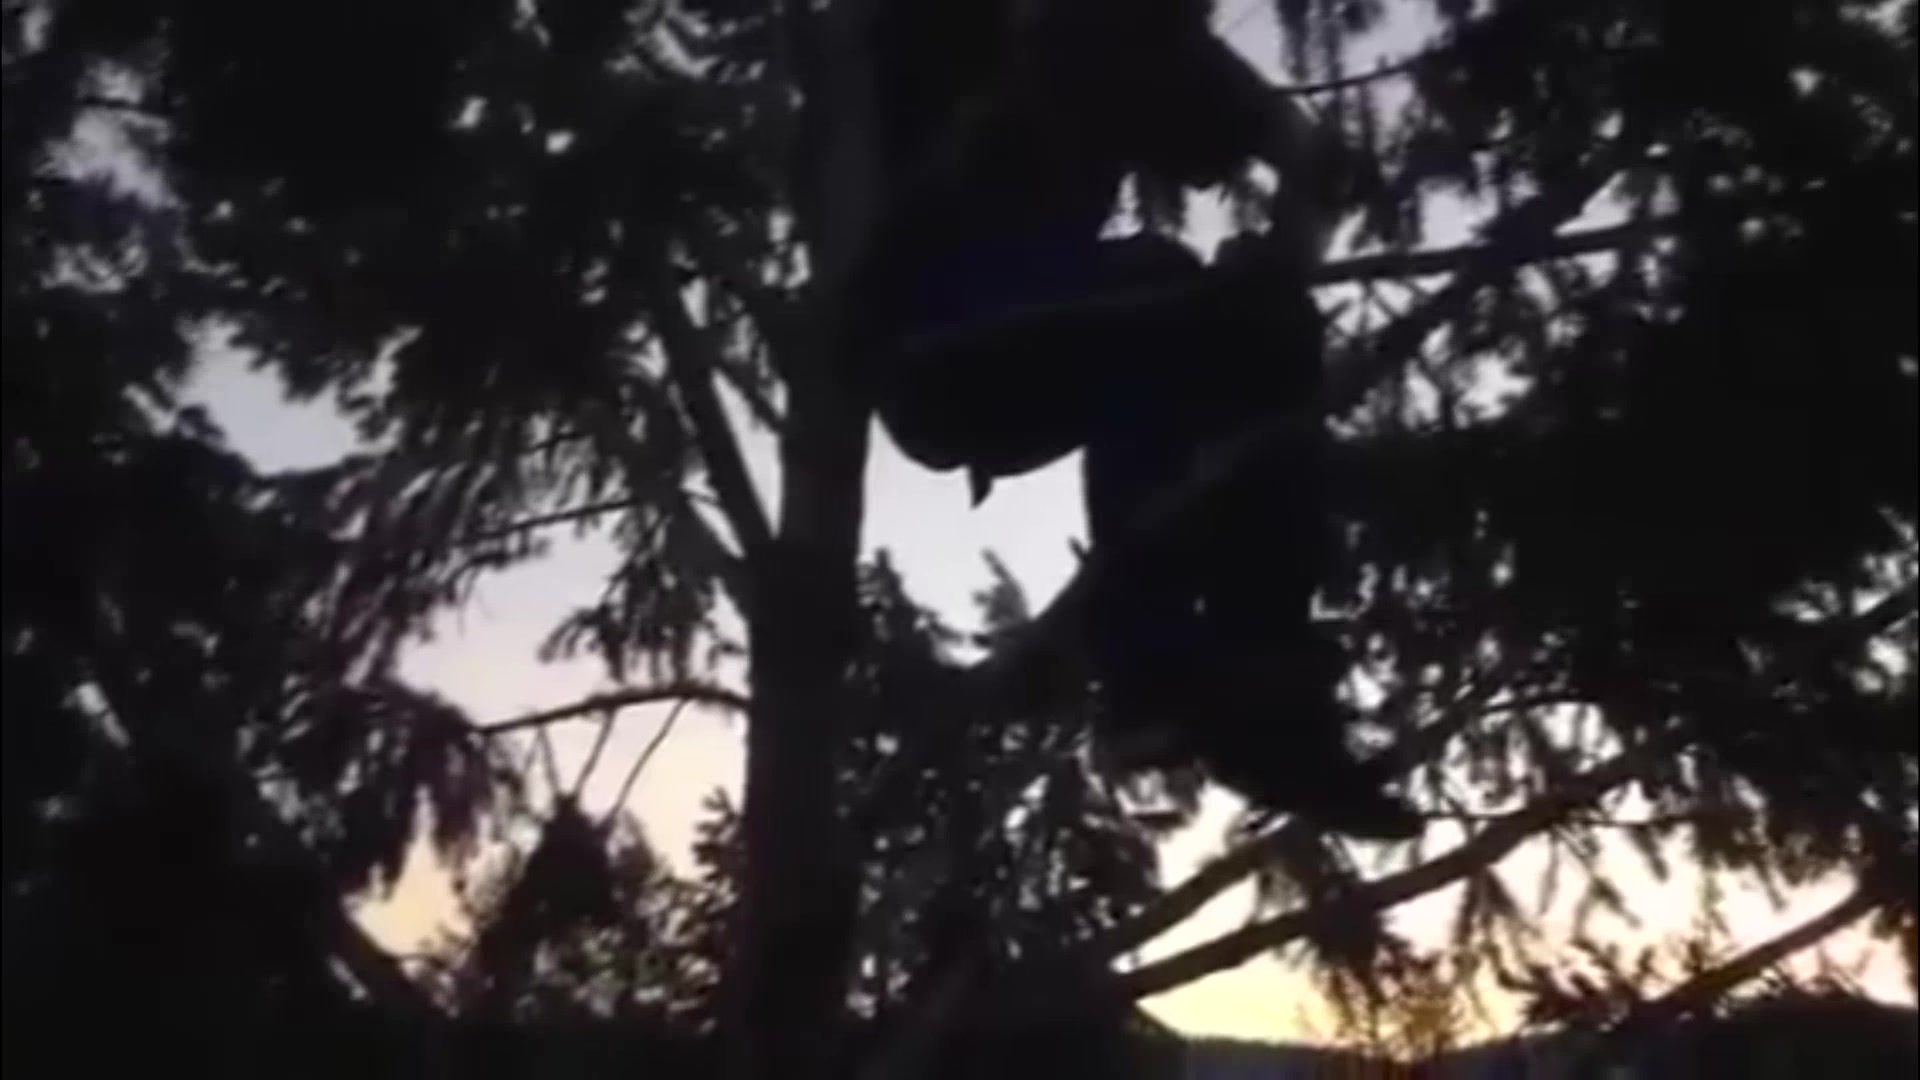 Pooping from a tree